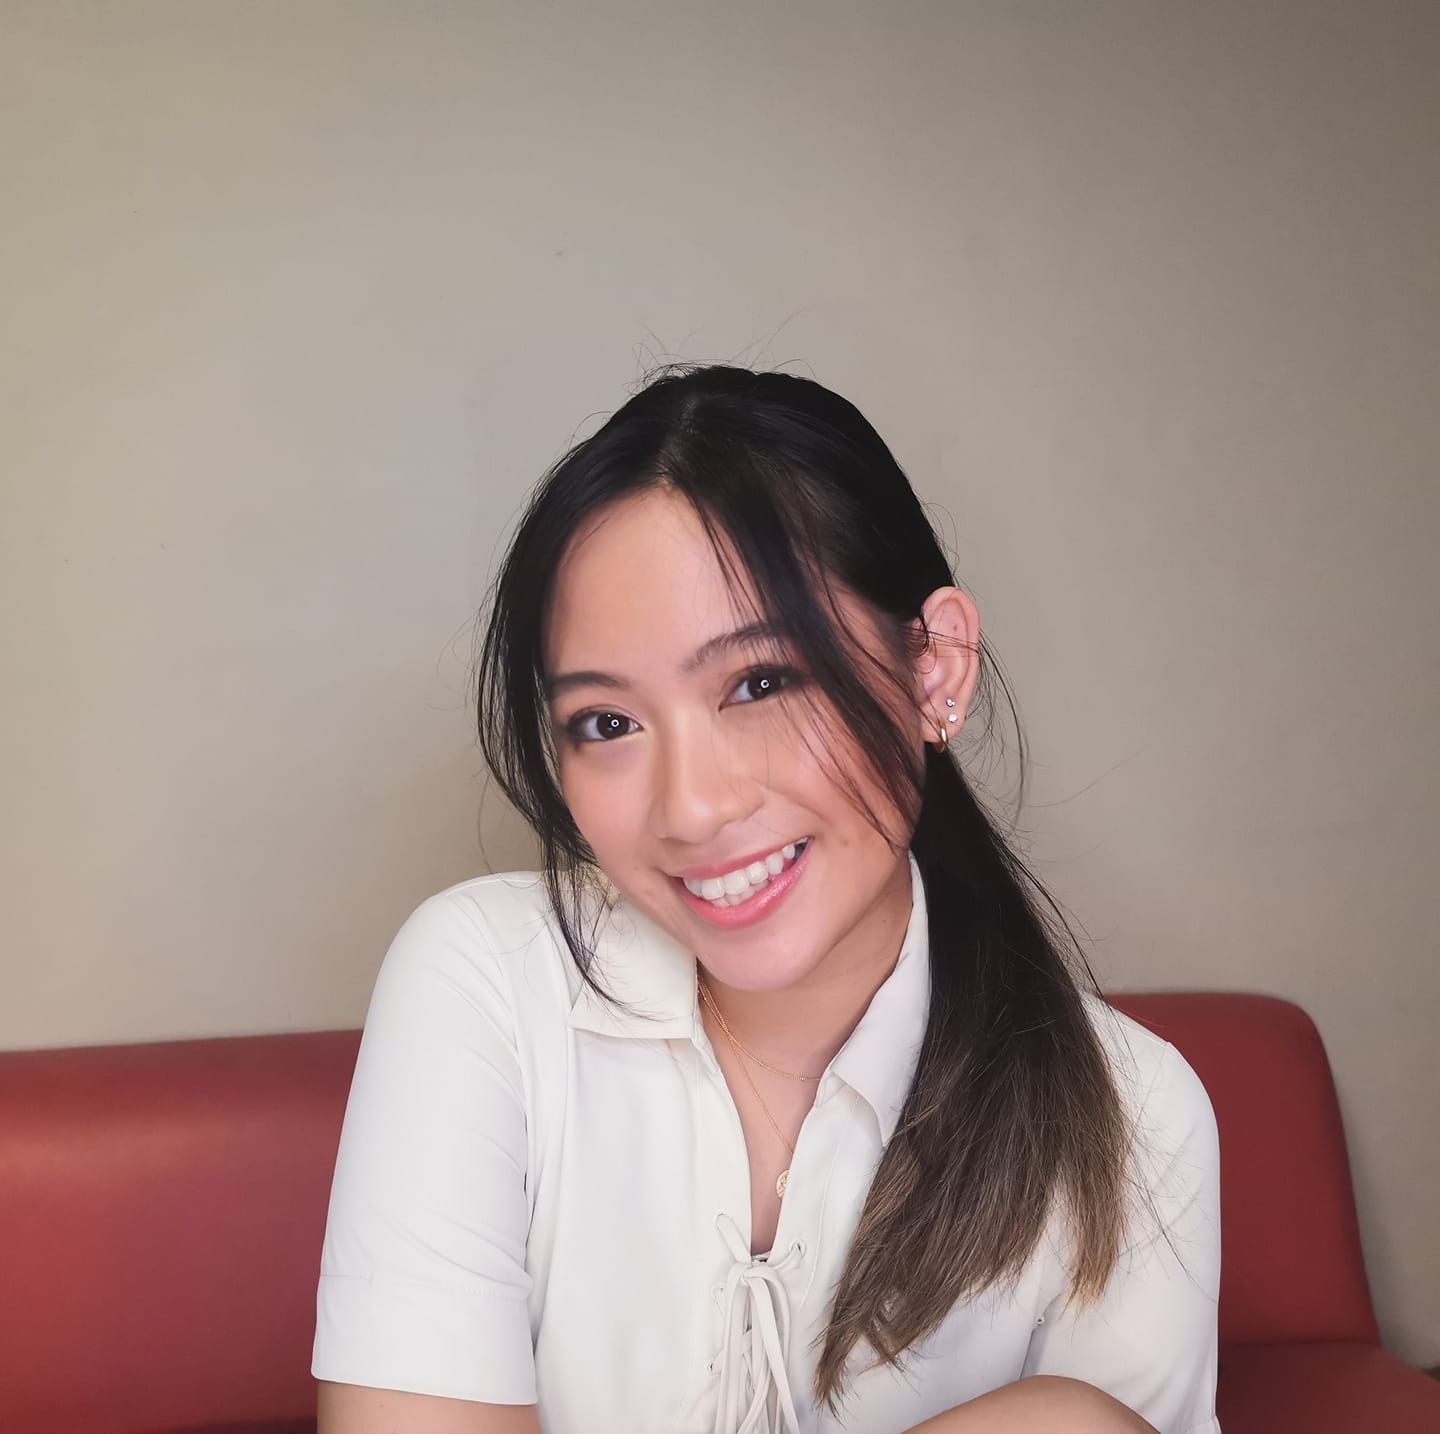 A young woman with long dark hair, smiling at the camera, wearing a white blouse, sitting on a red sofa with a beige wall in the background. She is Indiana Ramos.